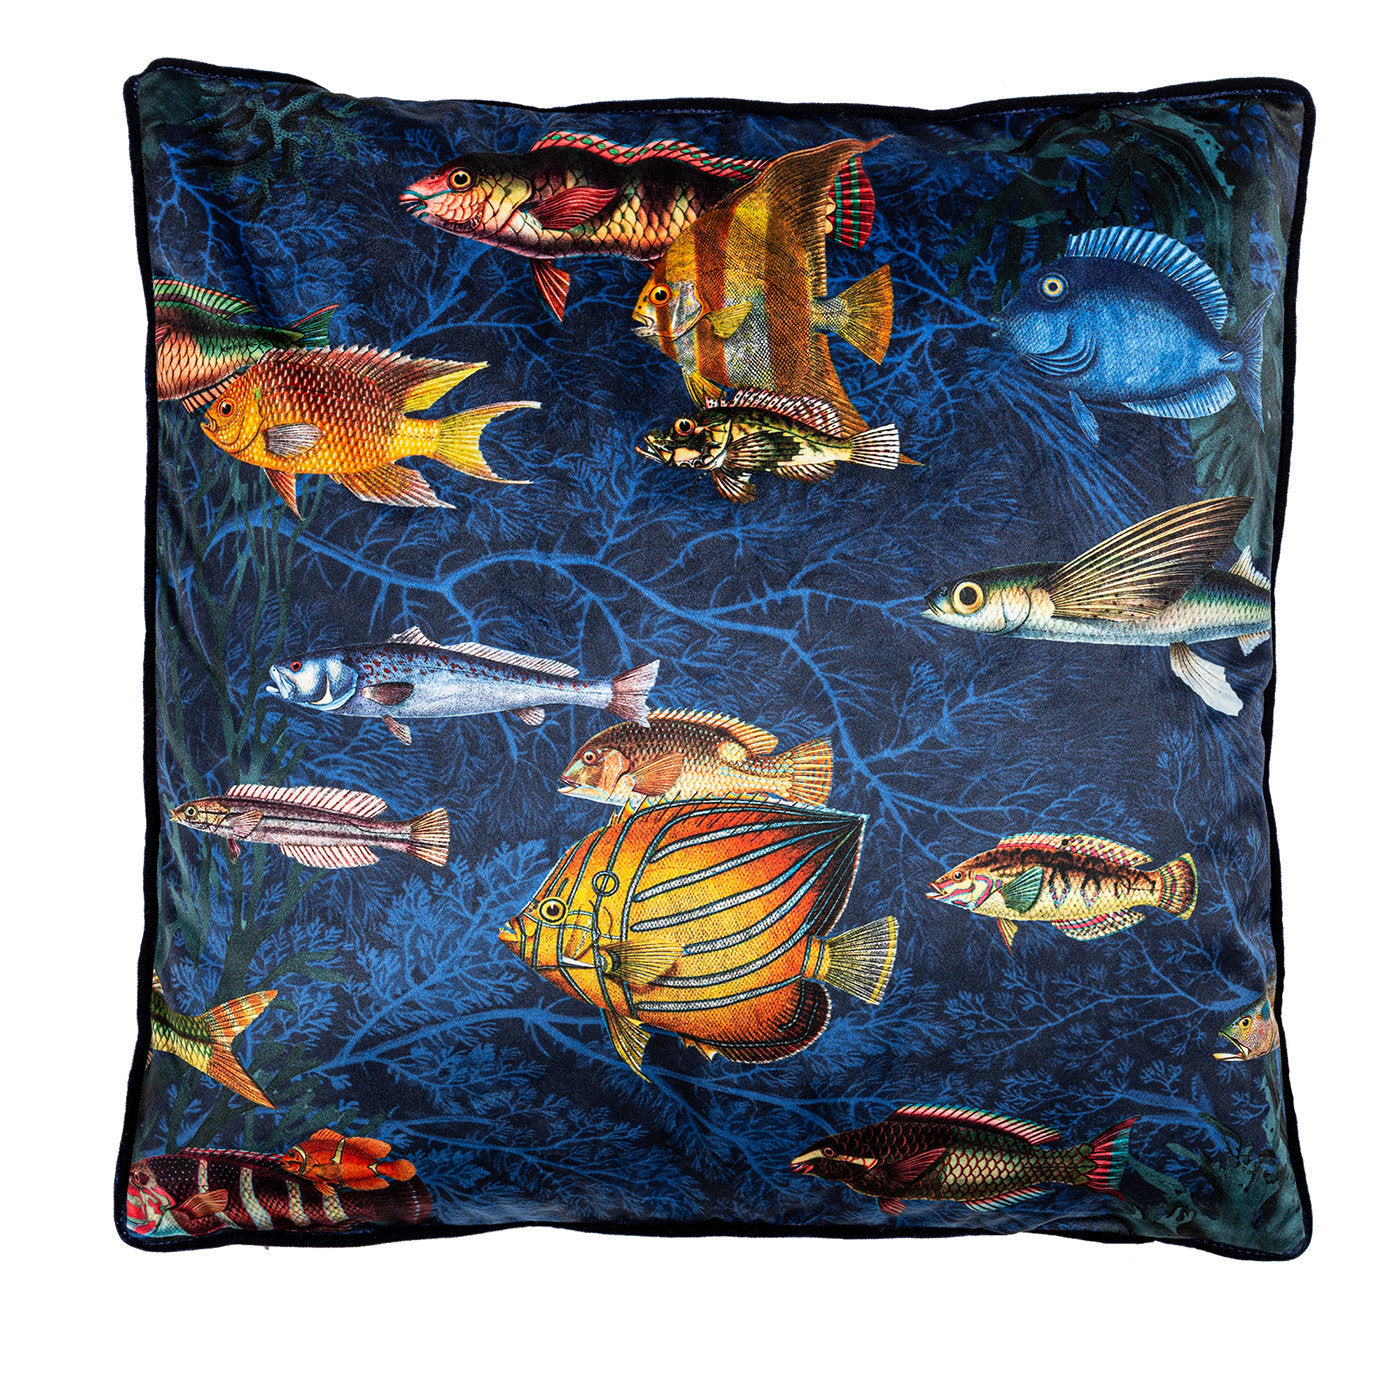 Amami Islands Velvet Cushion With Tropical Fish #5 - Main view